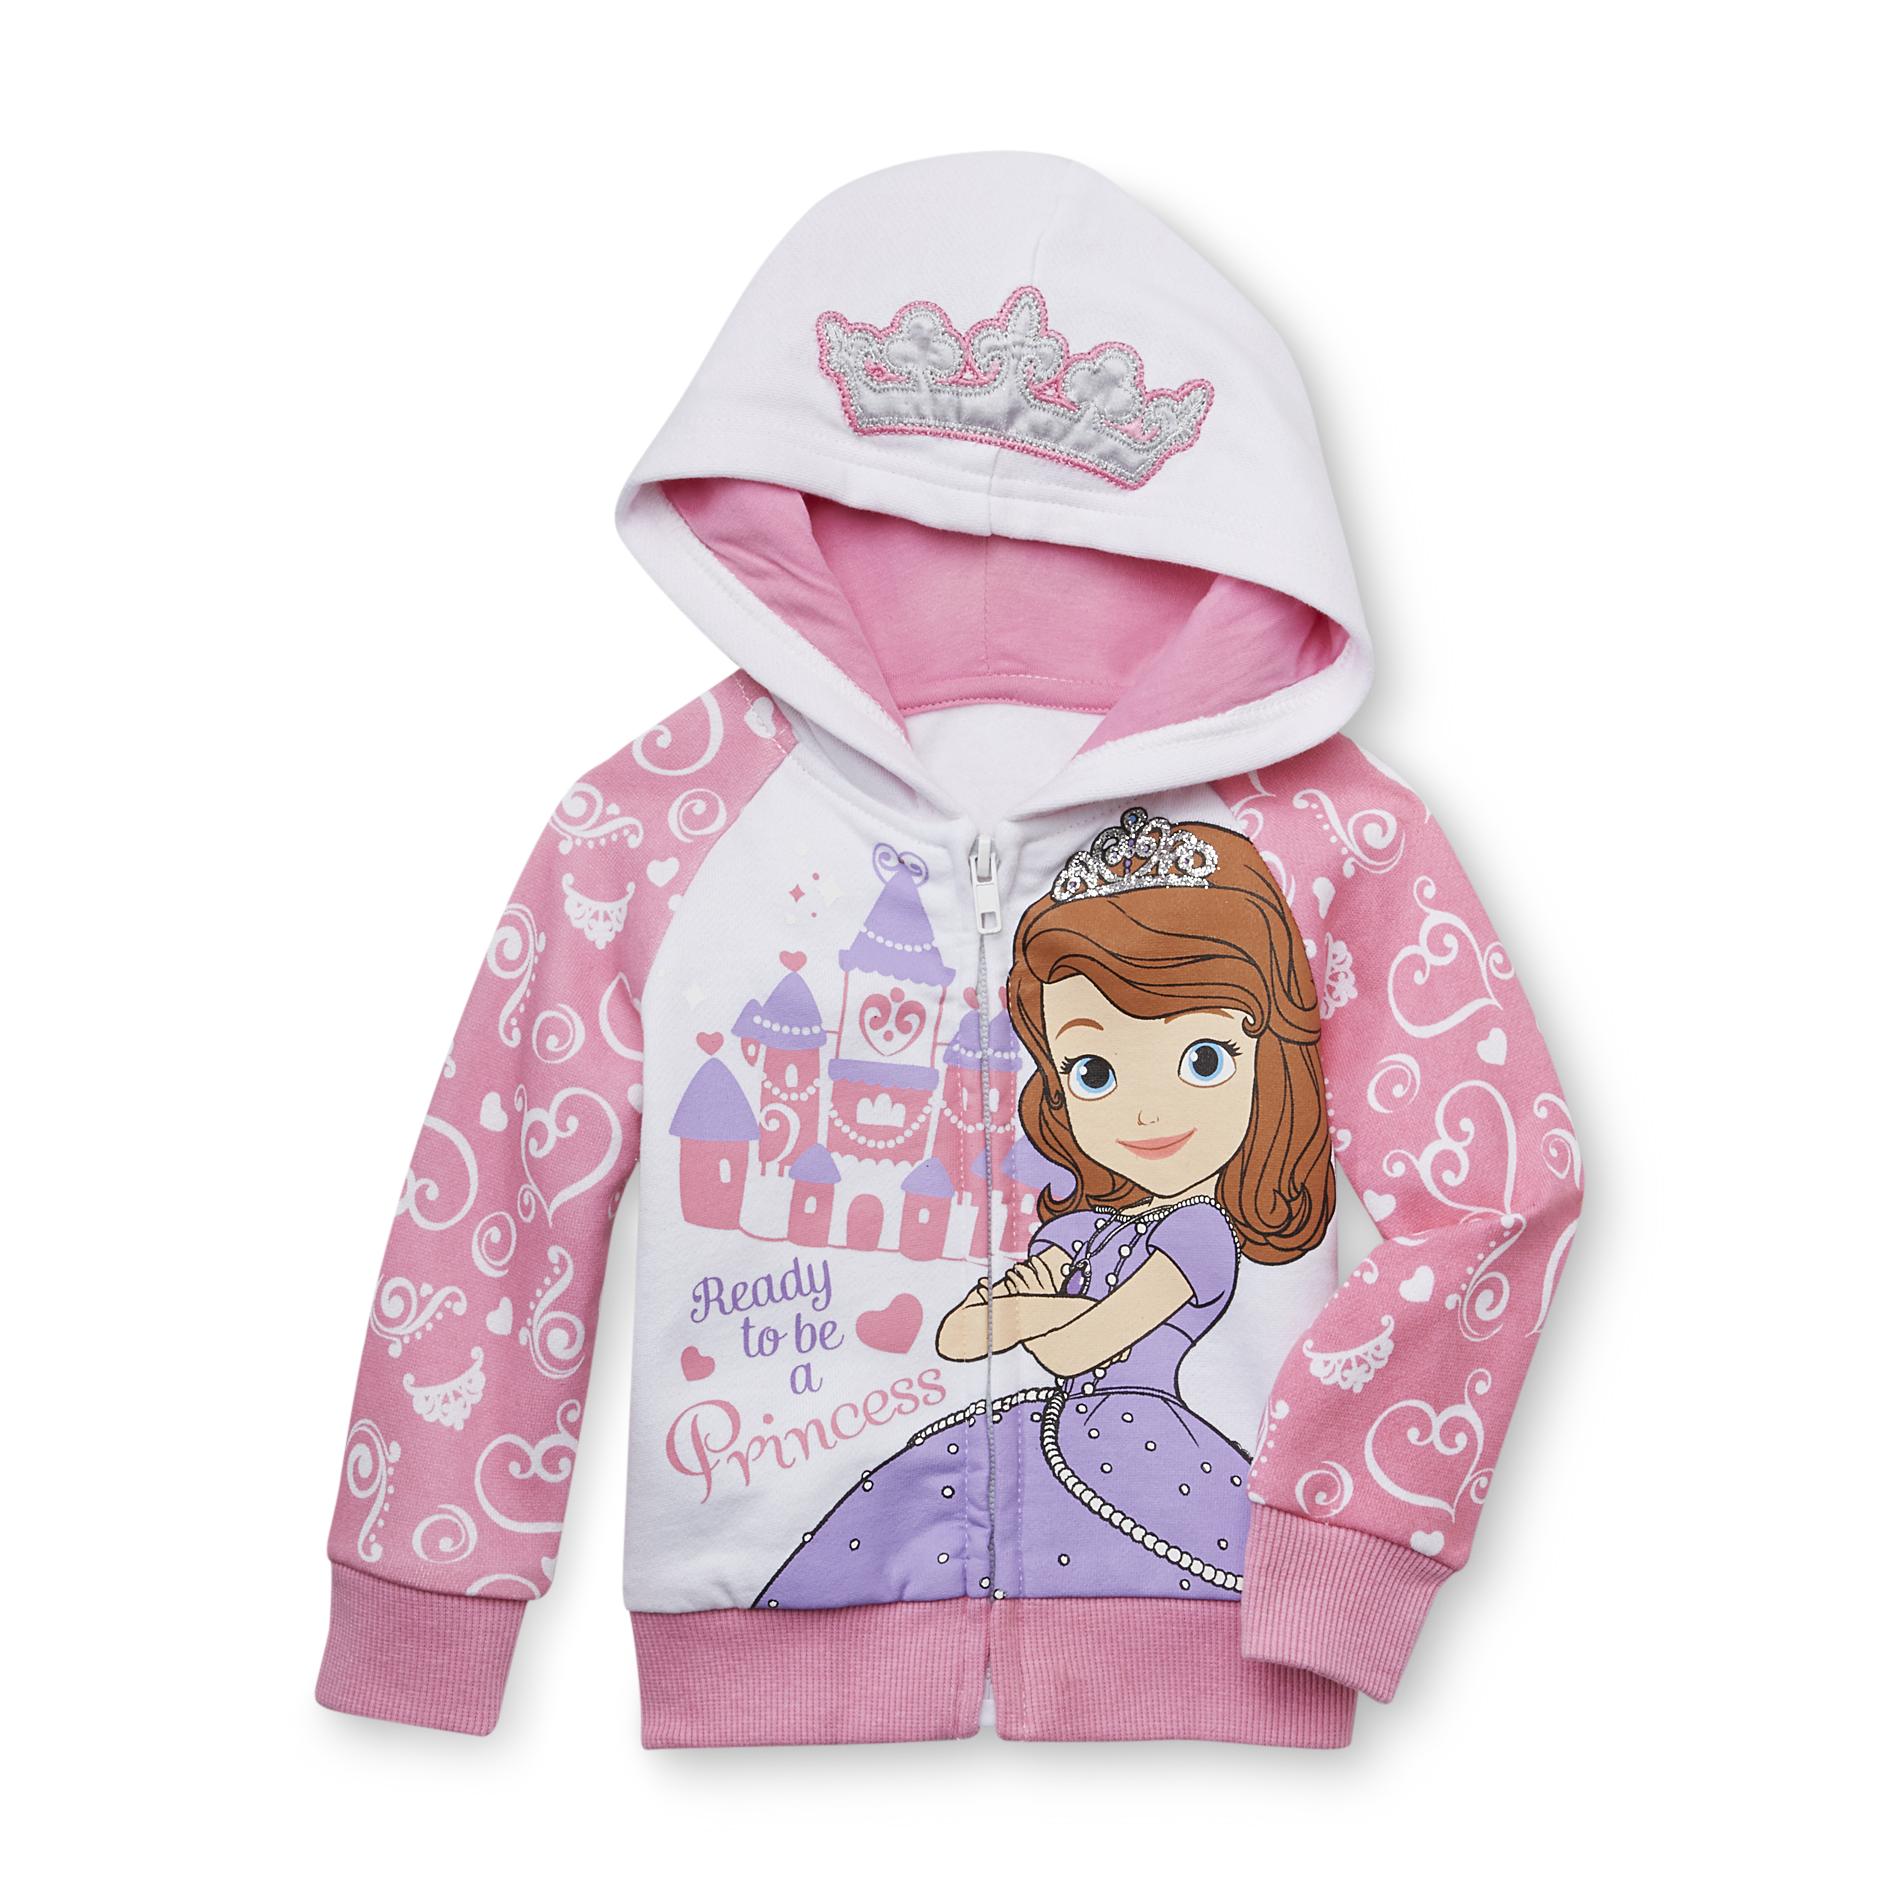 Disney Sofia the First Infant & Toddler Girl's Hoodie Jacket